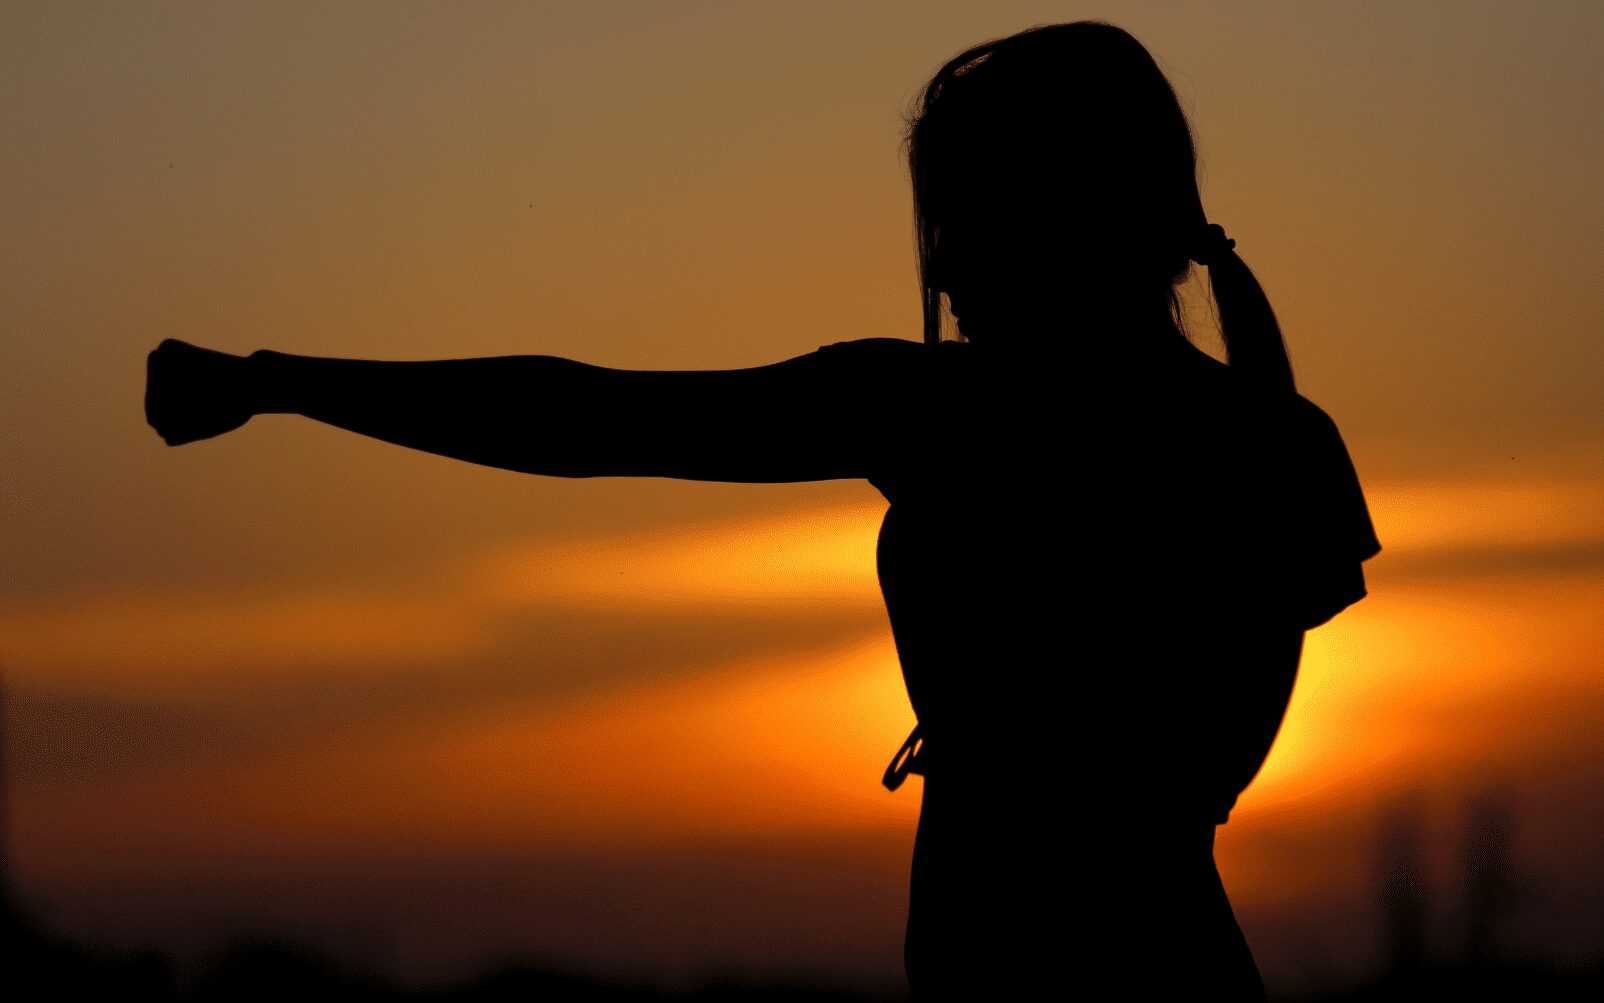 womans silhouette shown punching in front of sunset